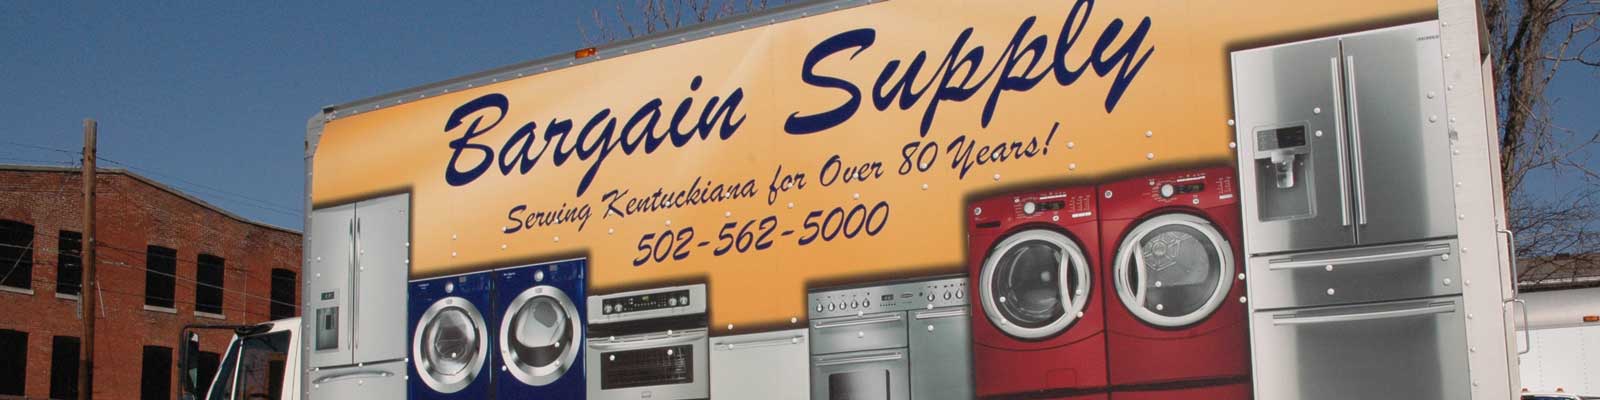 The Bargain Supply Appliance delivery truck